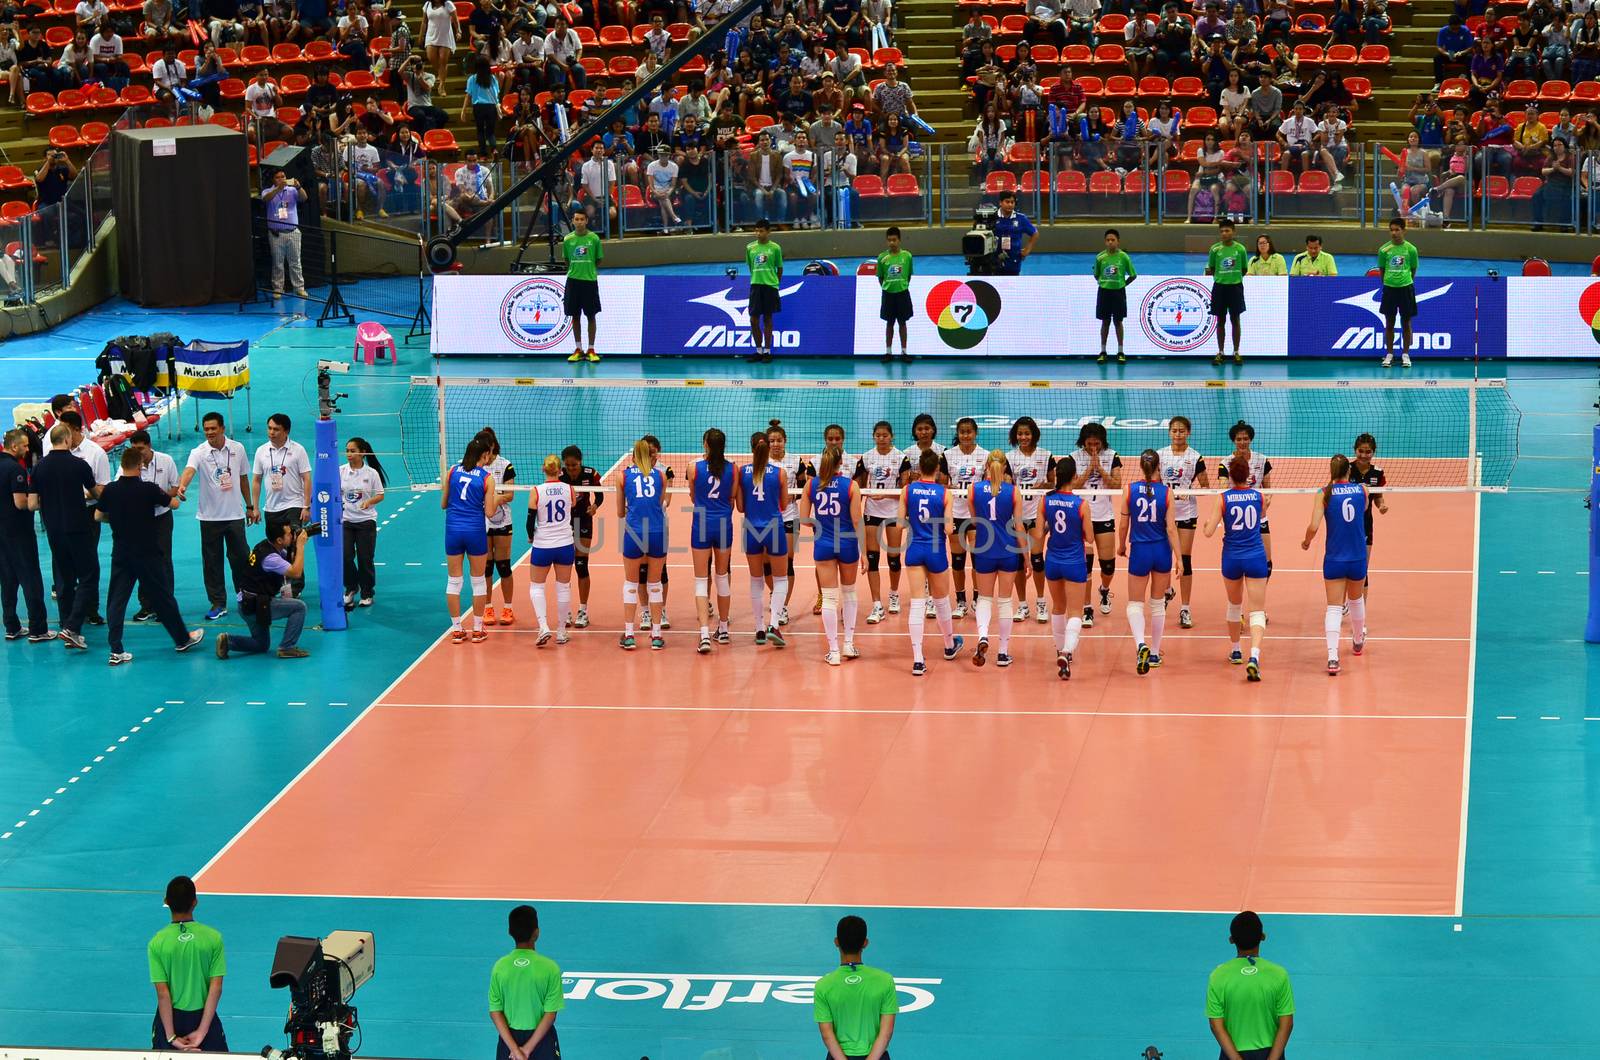 Bangkok, Thailand - July 3, 2015: Thailand and Serbia Volleyball Women Team in action during The FIVB Volleyball World Grand Prix at Indoor Stadium Huamark on July 3, 2015 in Bangkok, Thailand.